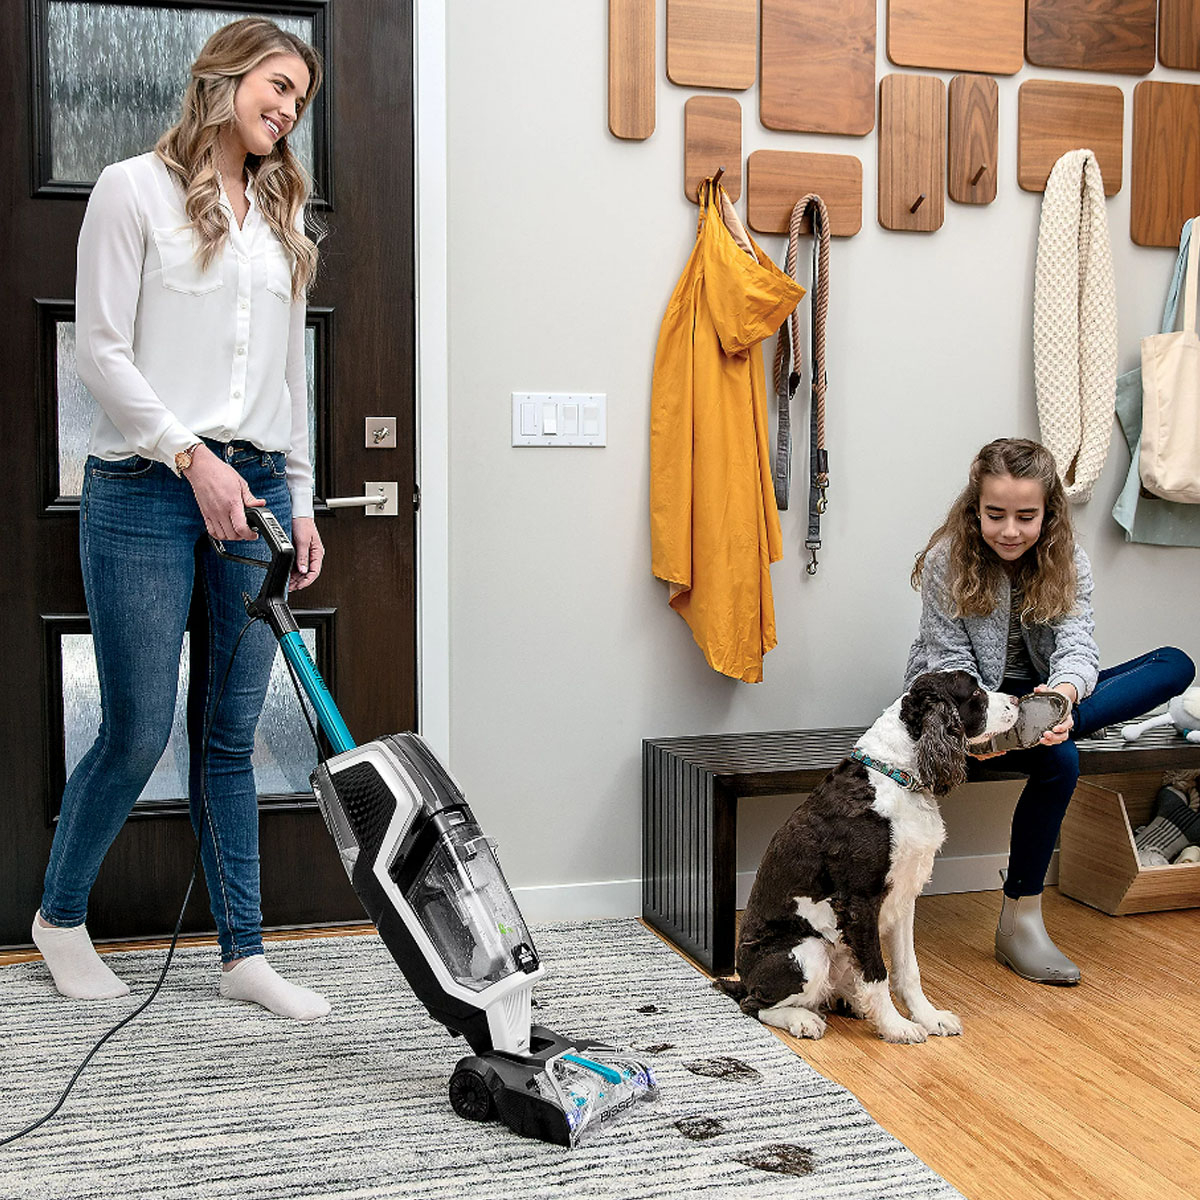 Deal Alert: The Bissell JetScrub Multi-Surface Carpet & Rug Cleaner System Is Just $200 Today – E! Online